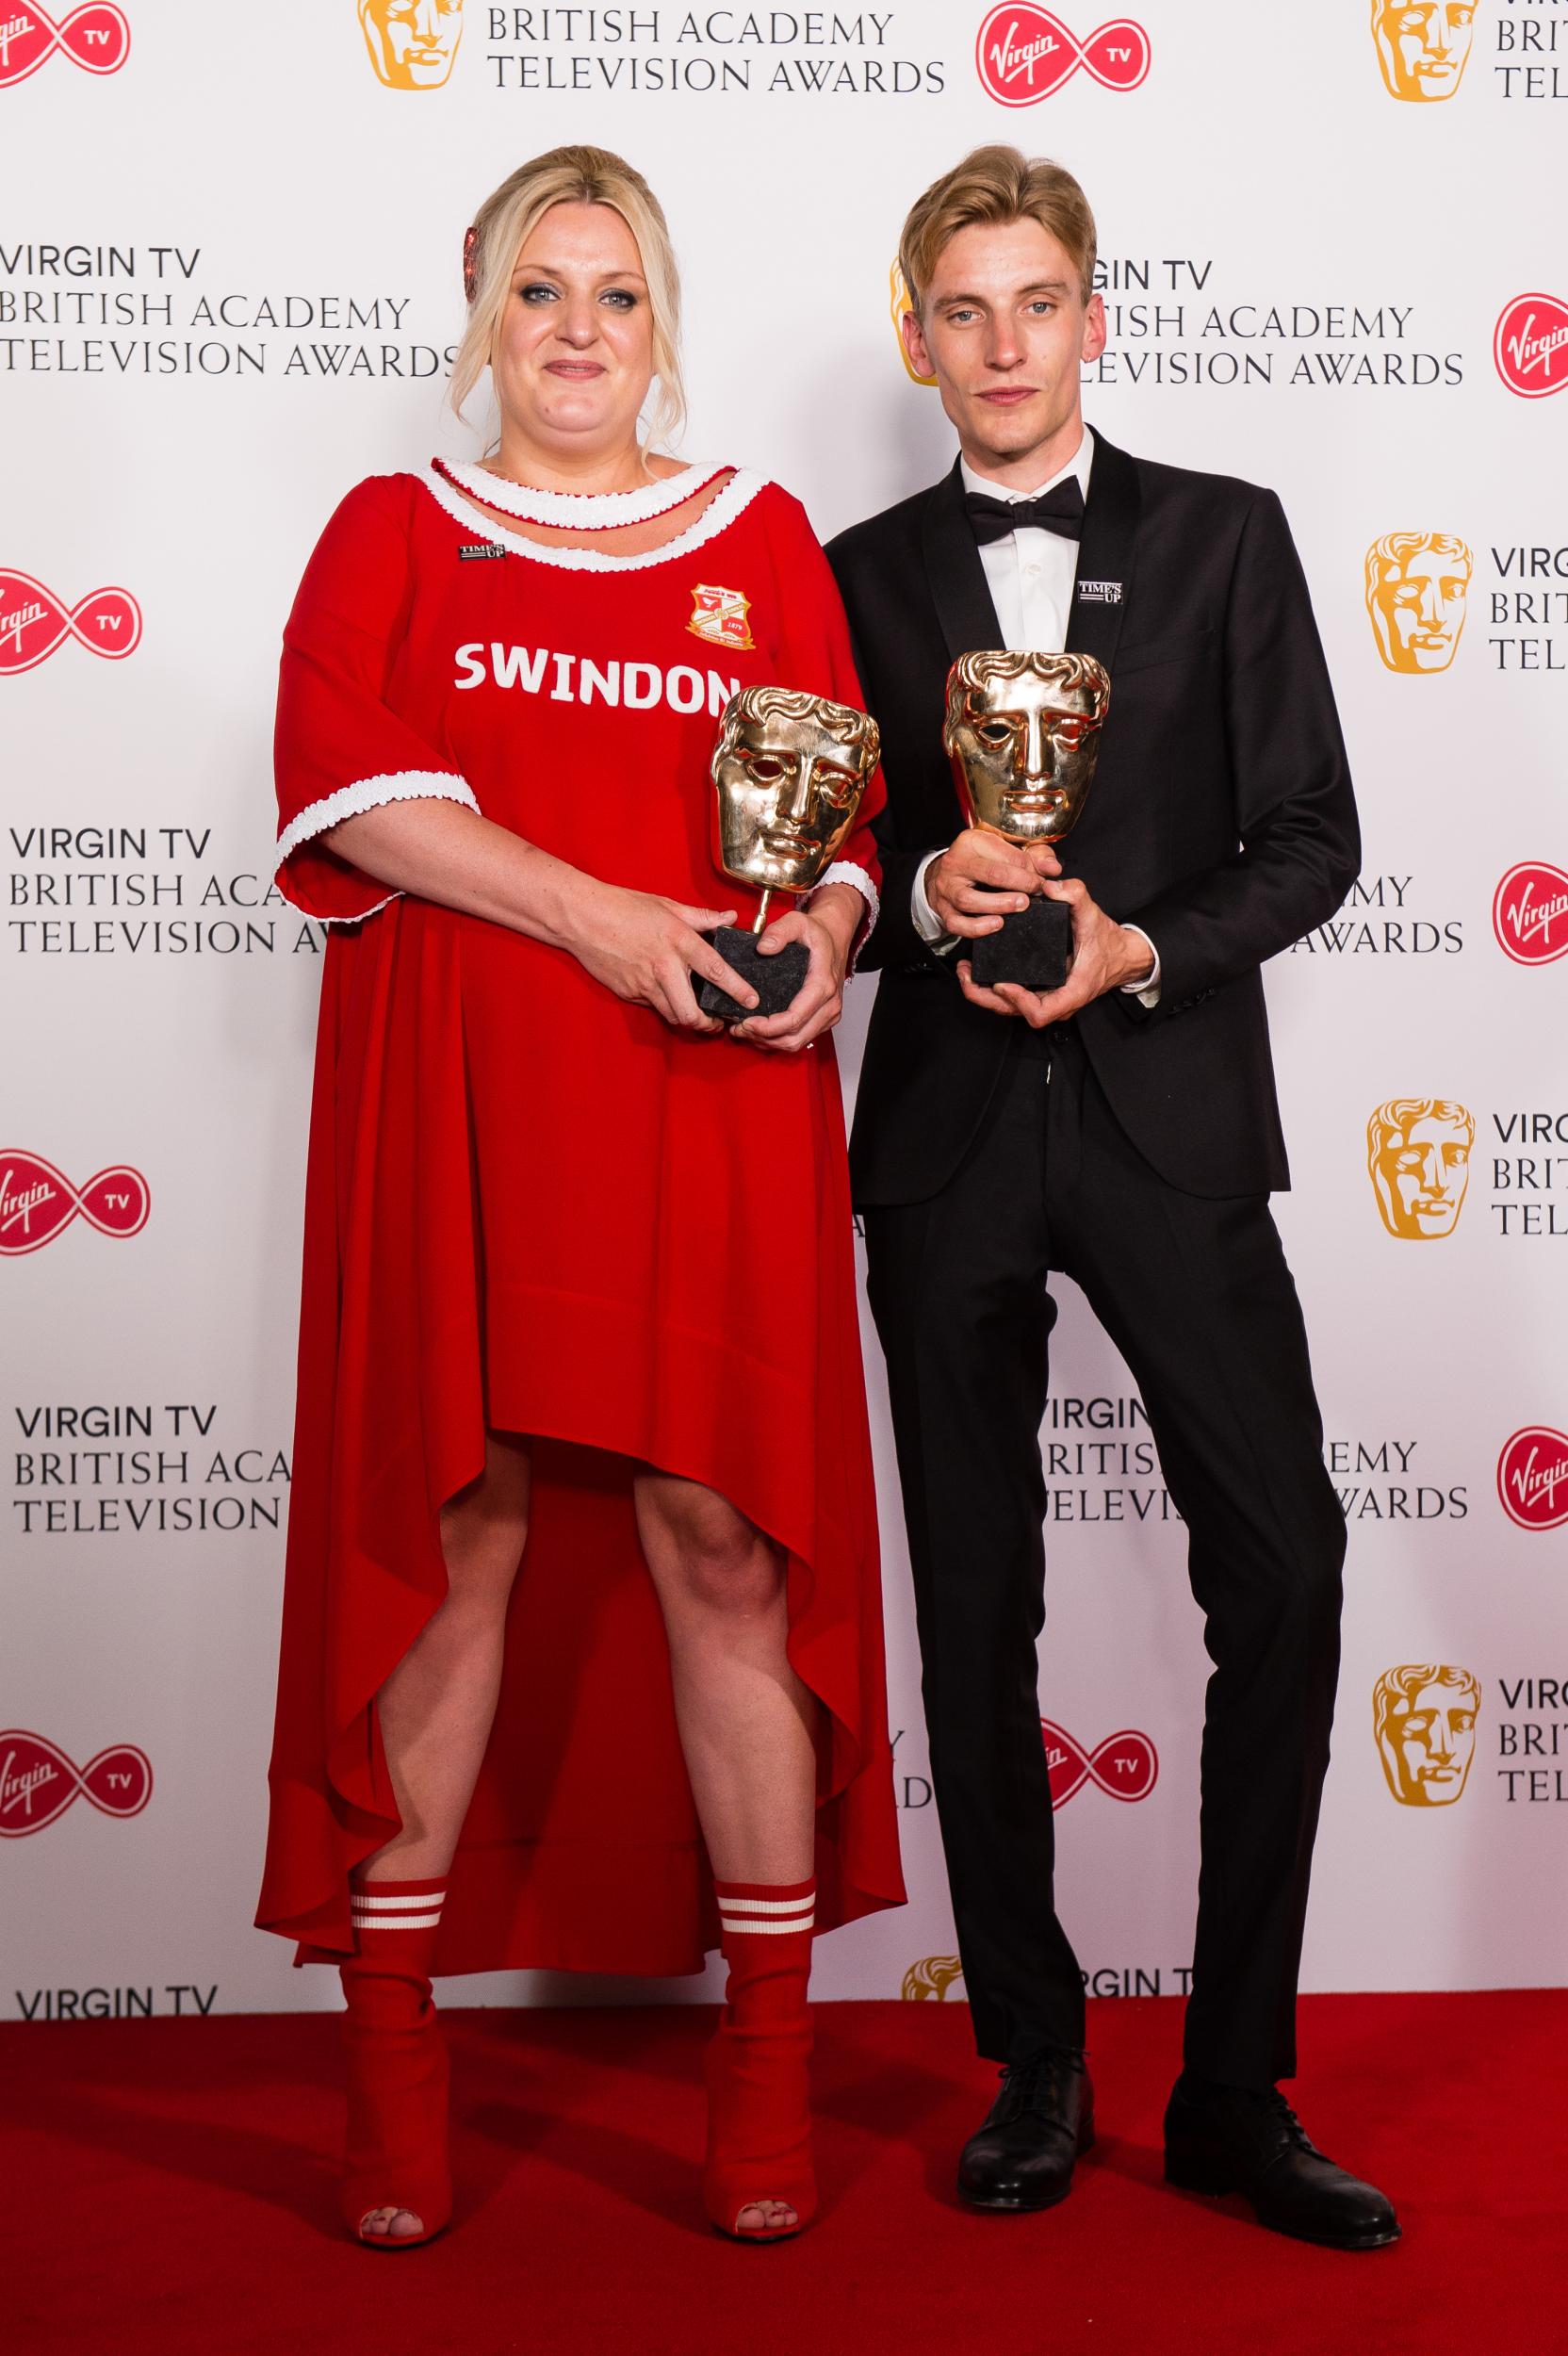 Charlie Cooper and Daisy May Cooper attend the Virgin TV British Academy Television Awards at The Royal Festival Hall on May 13, 2018 in London, England.